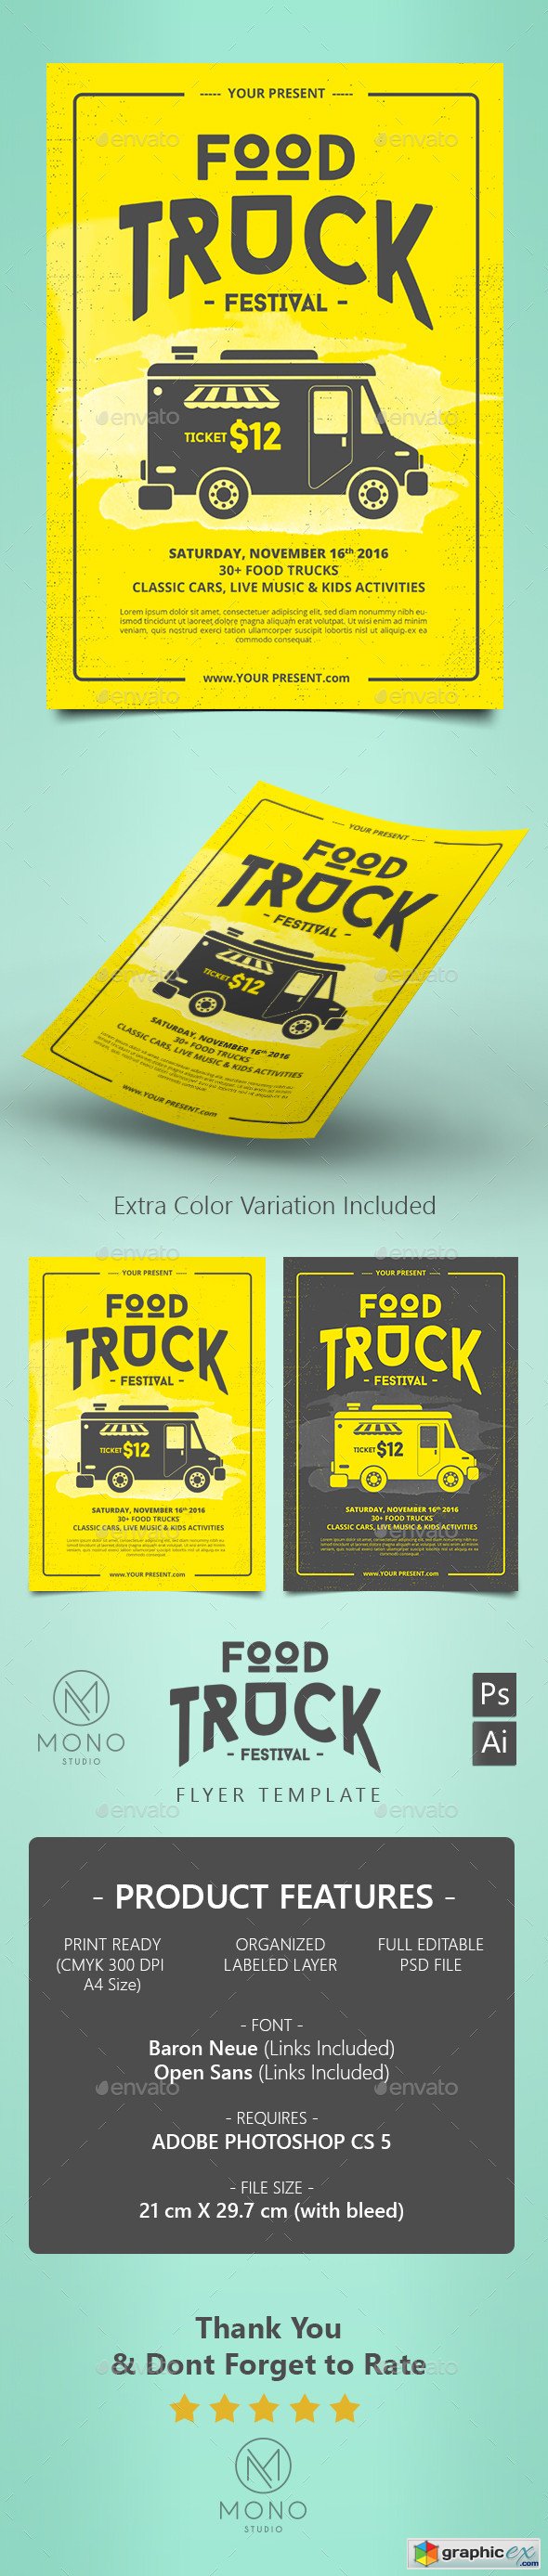 Food Truck Flyer / Poster